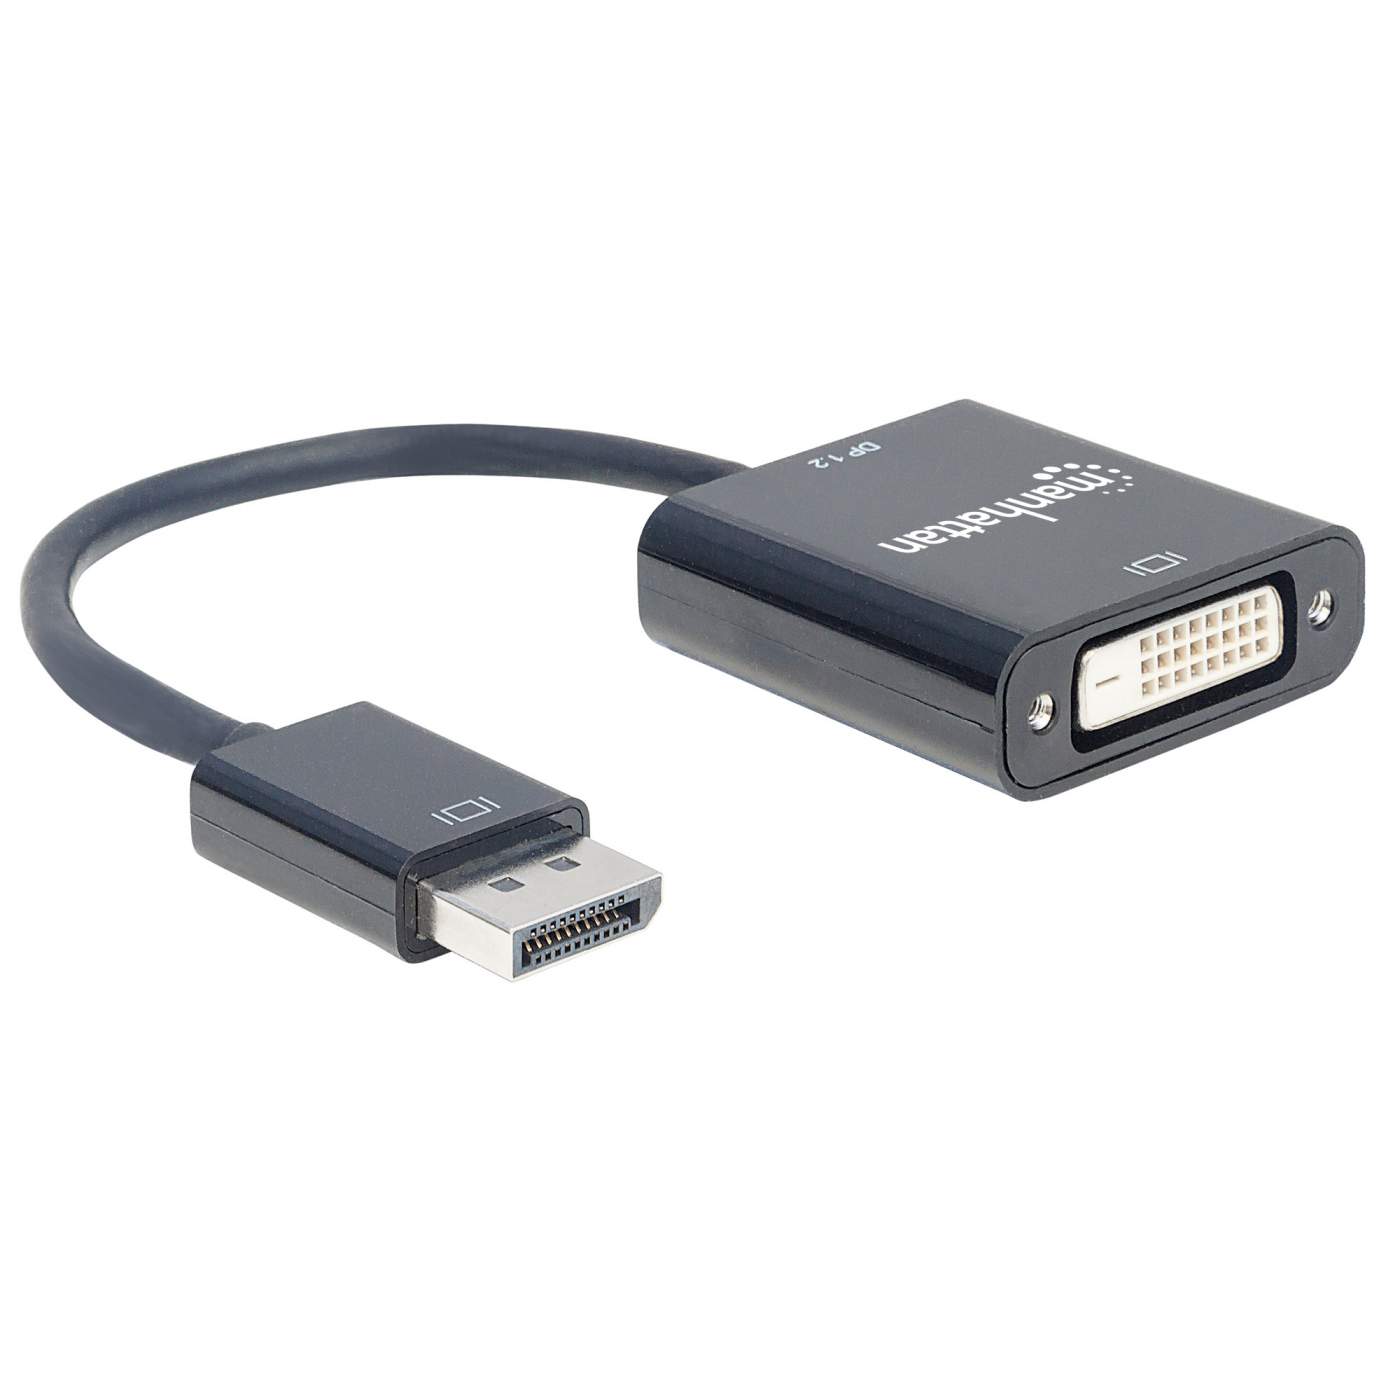 DisplayPort to HDMI Adapter - VC985, ATEN Video Converters